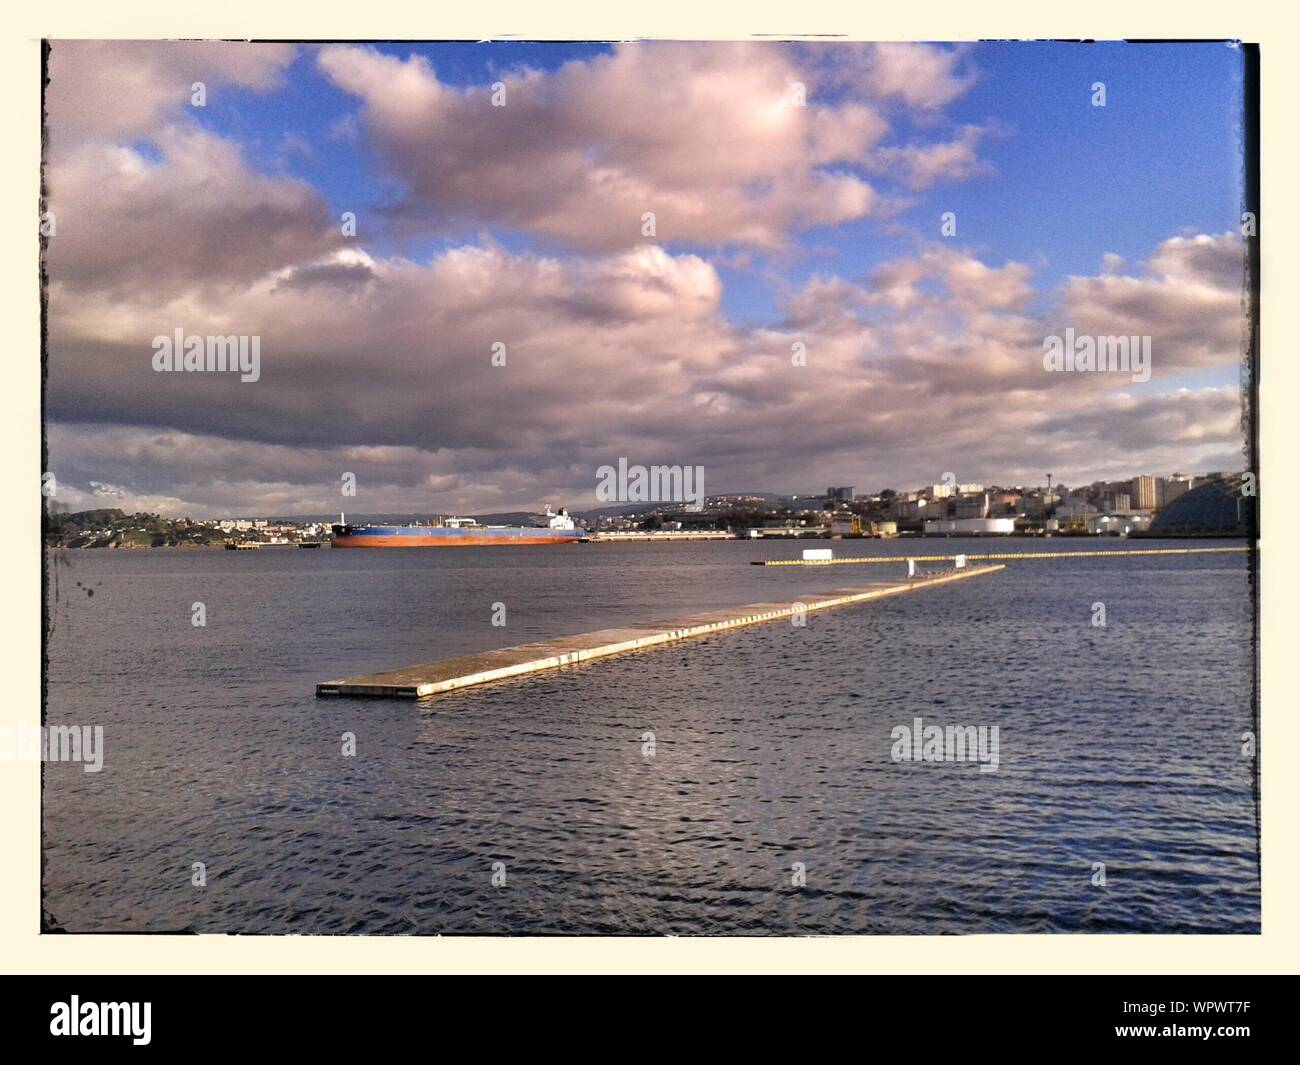 Wooden Platforms On Sea At Shipping Industry Against Cloudy Sky Stock Photo